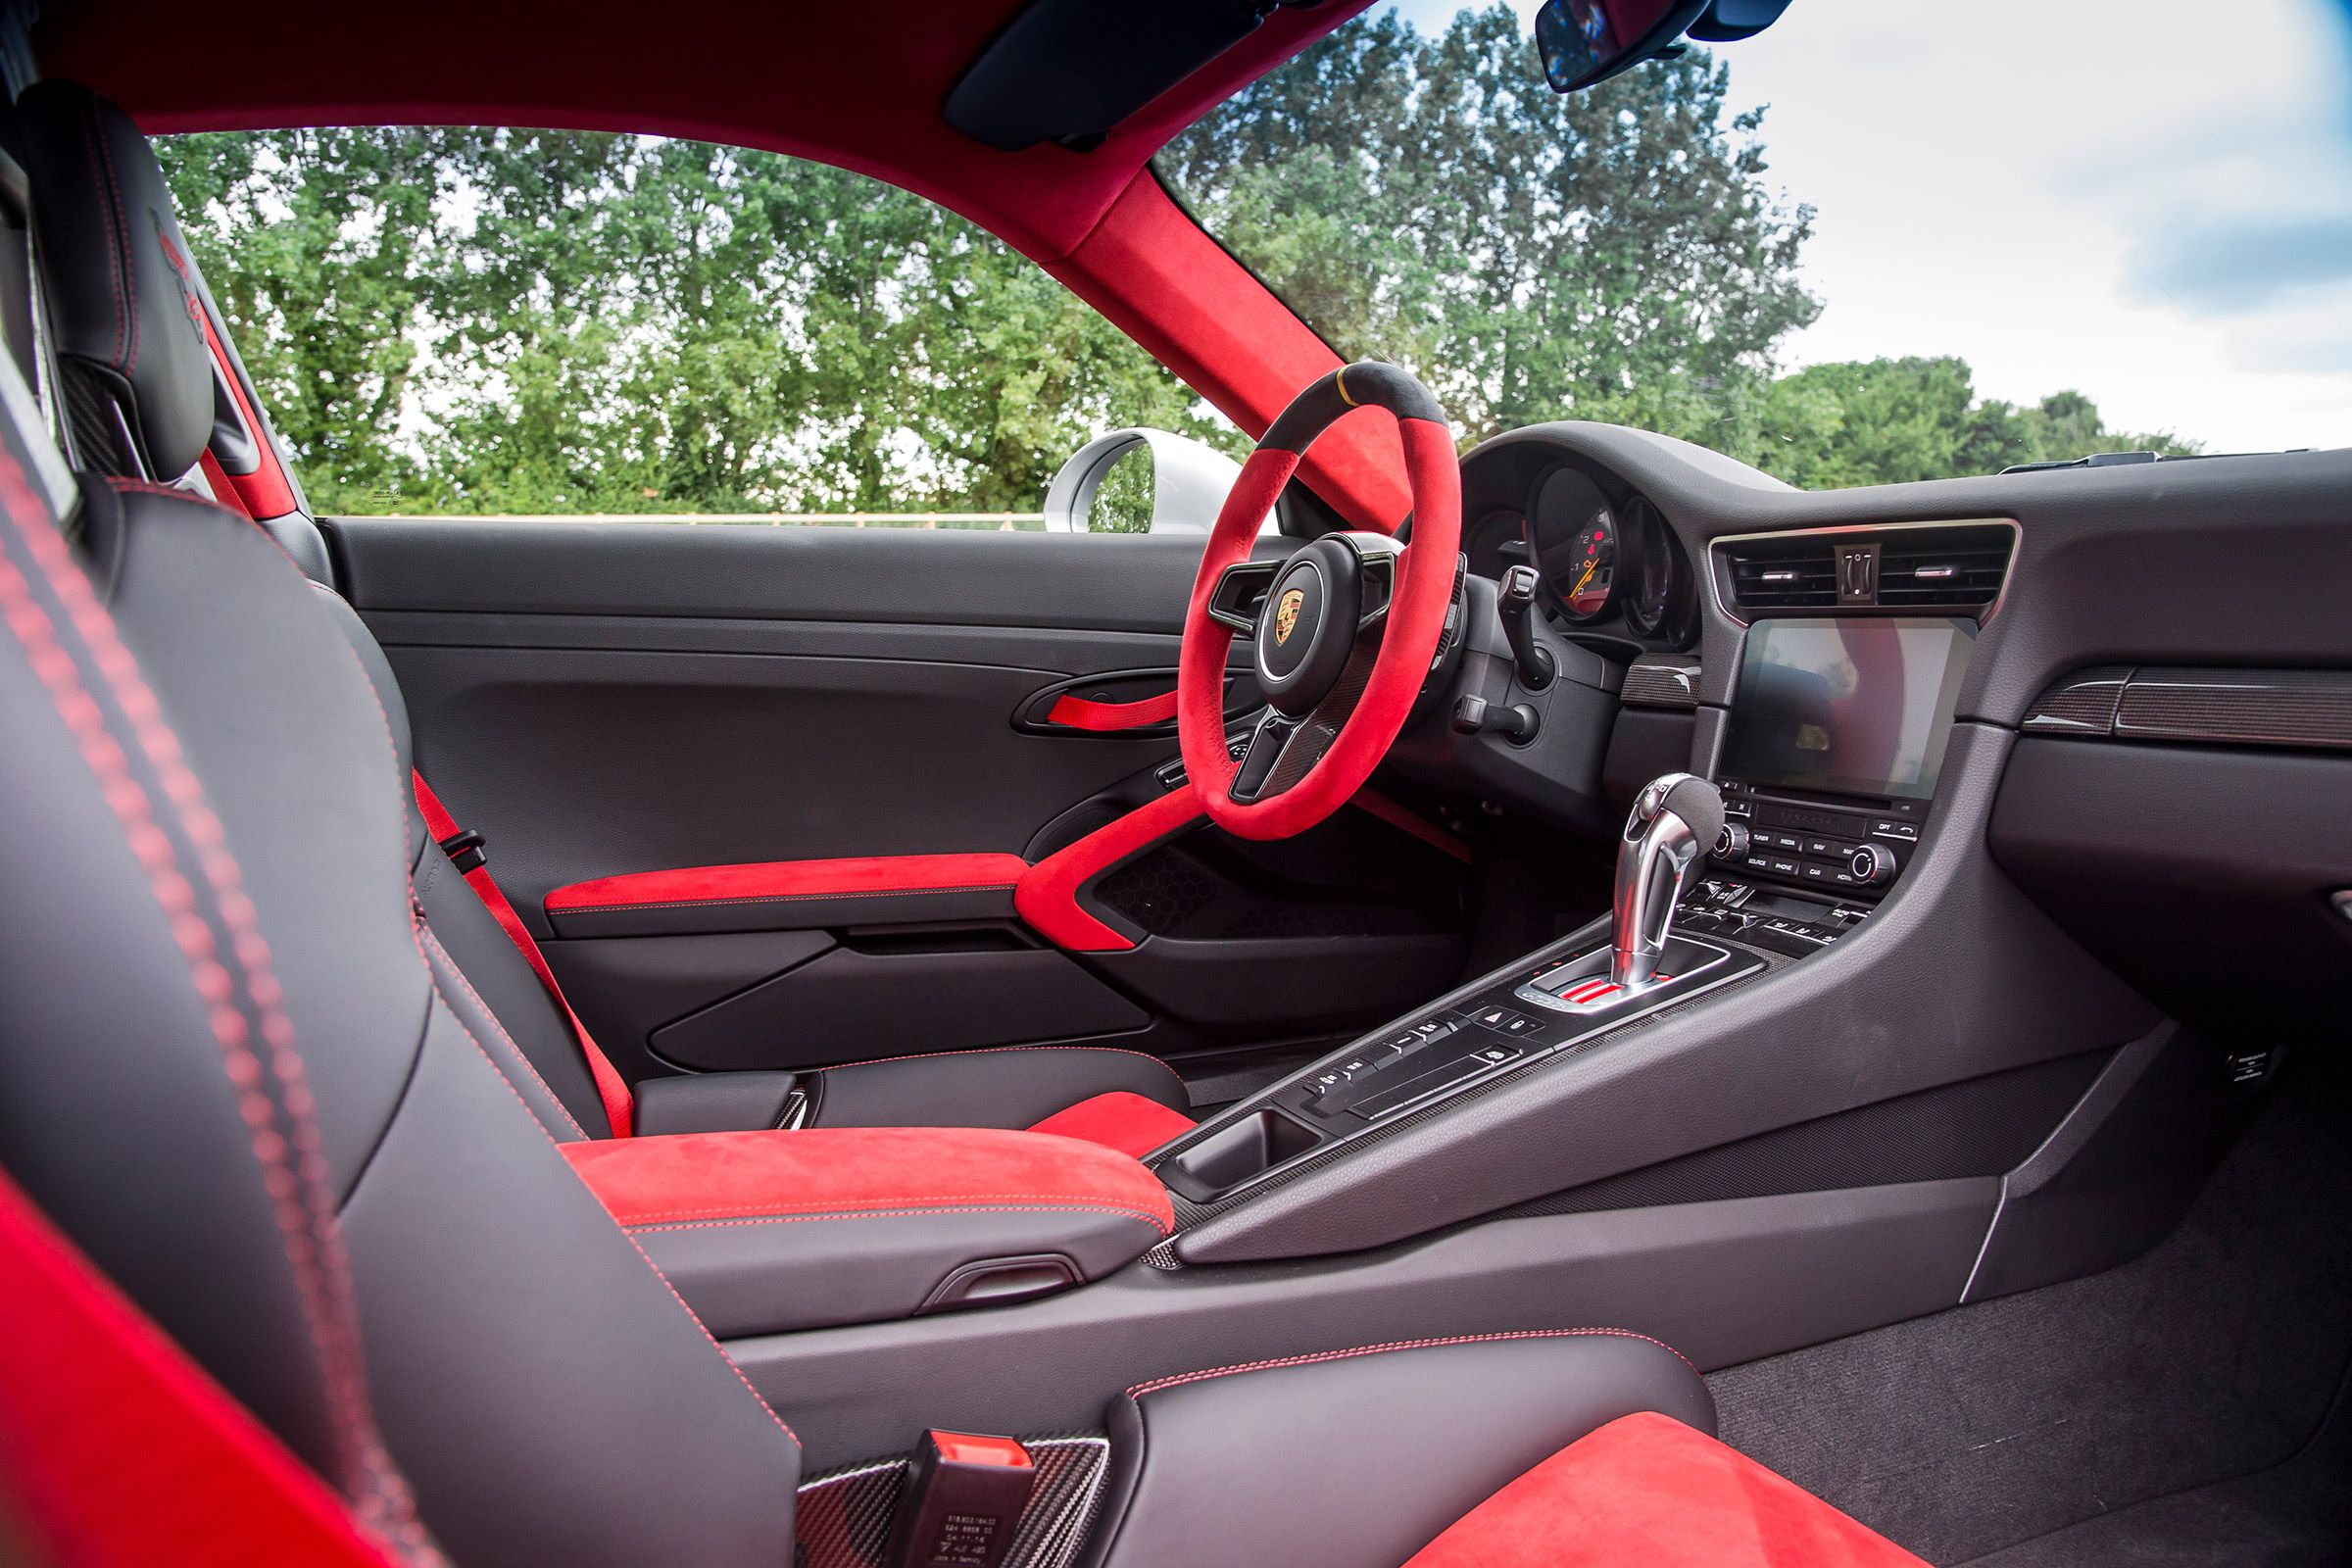 the Porsche 911 GT2 RS comes with a Swift Transmission